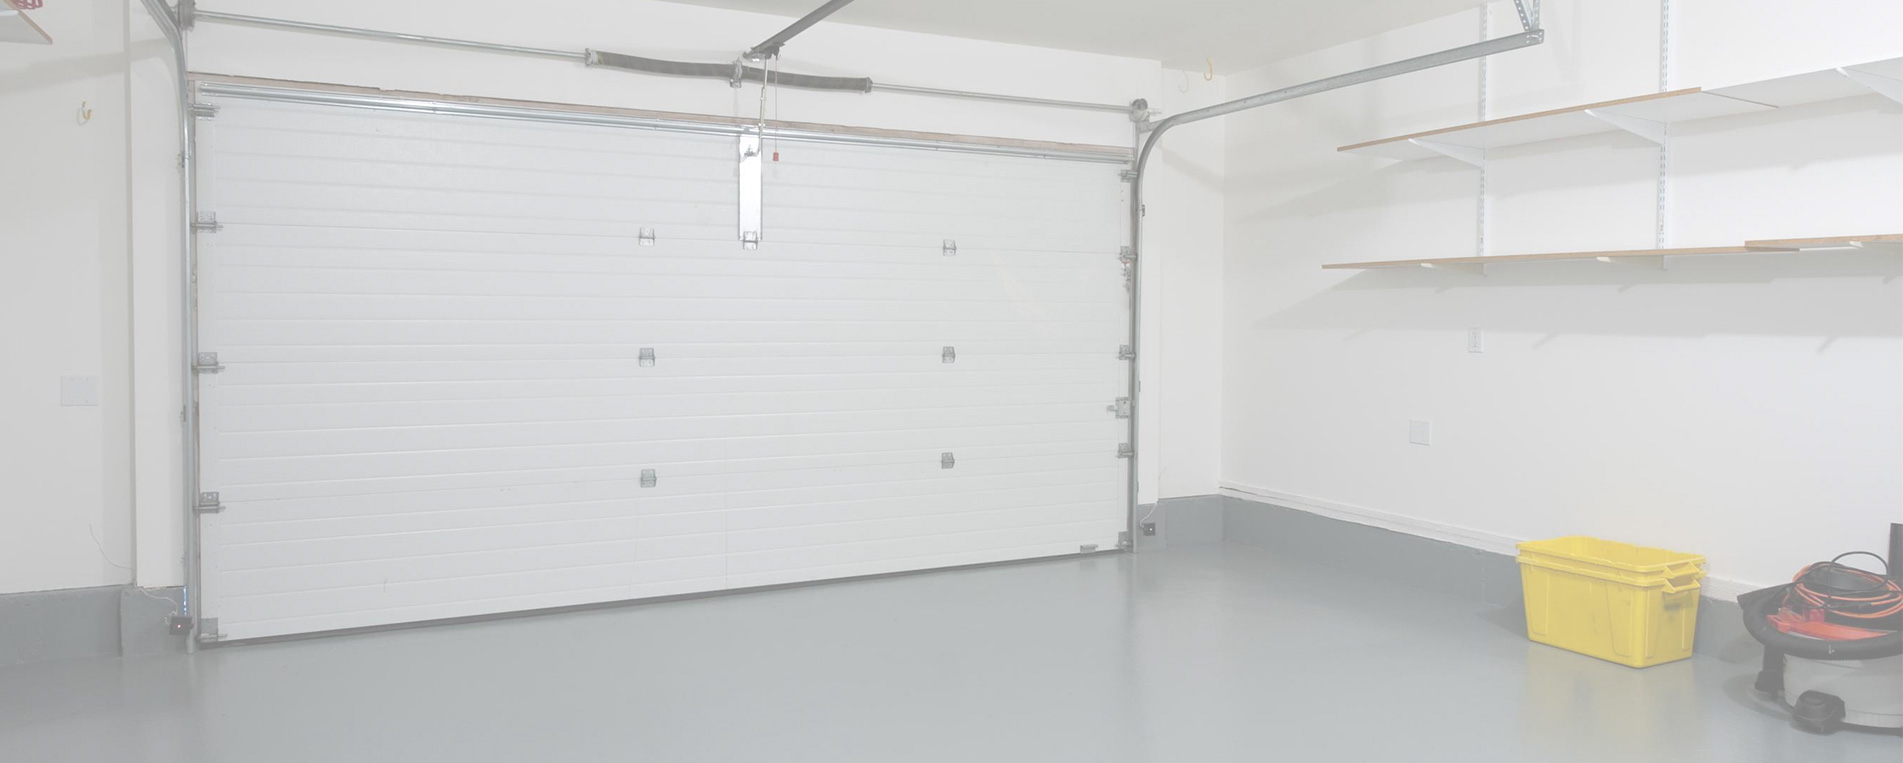 Is Your Garage Door Ready for Any Weather?